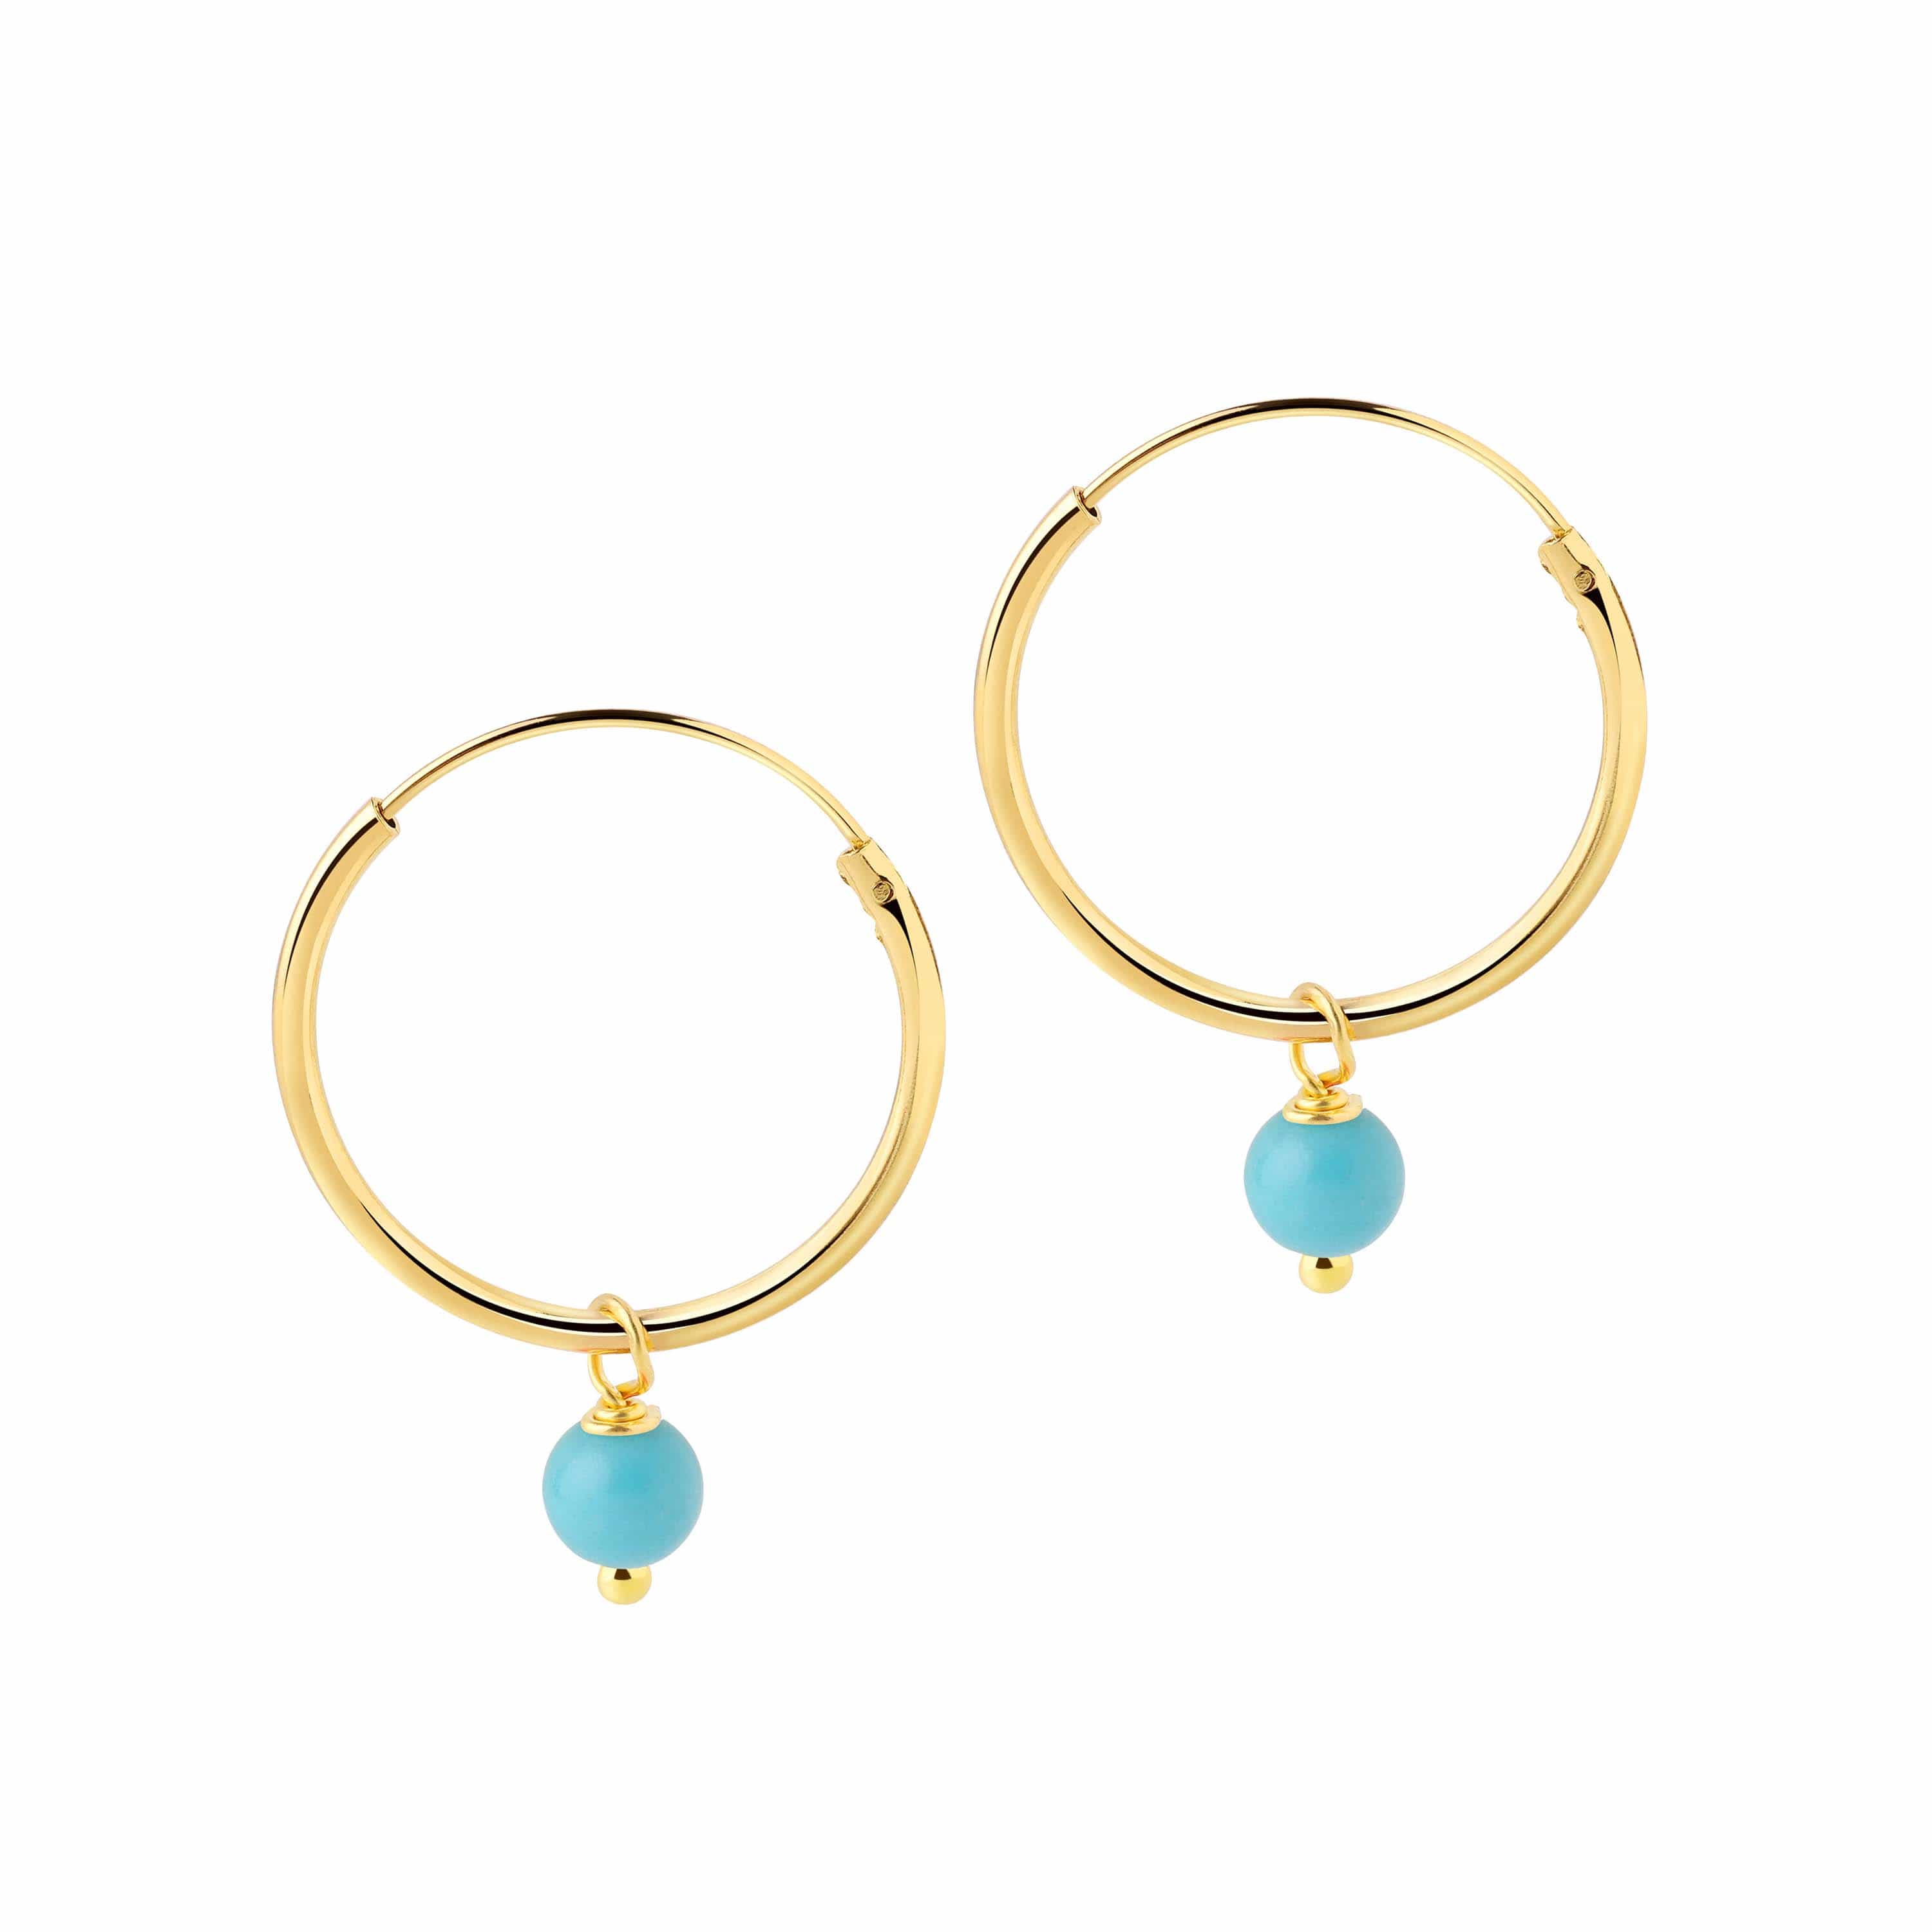 Small Gold Plated Hoop Earrings with Turquoise Blue Stone